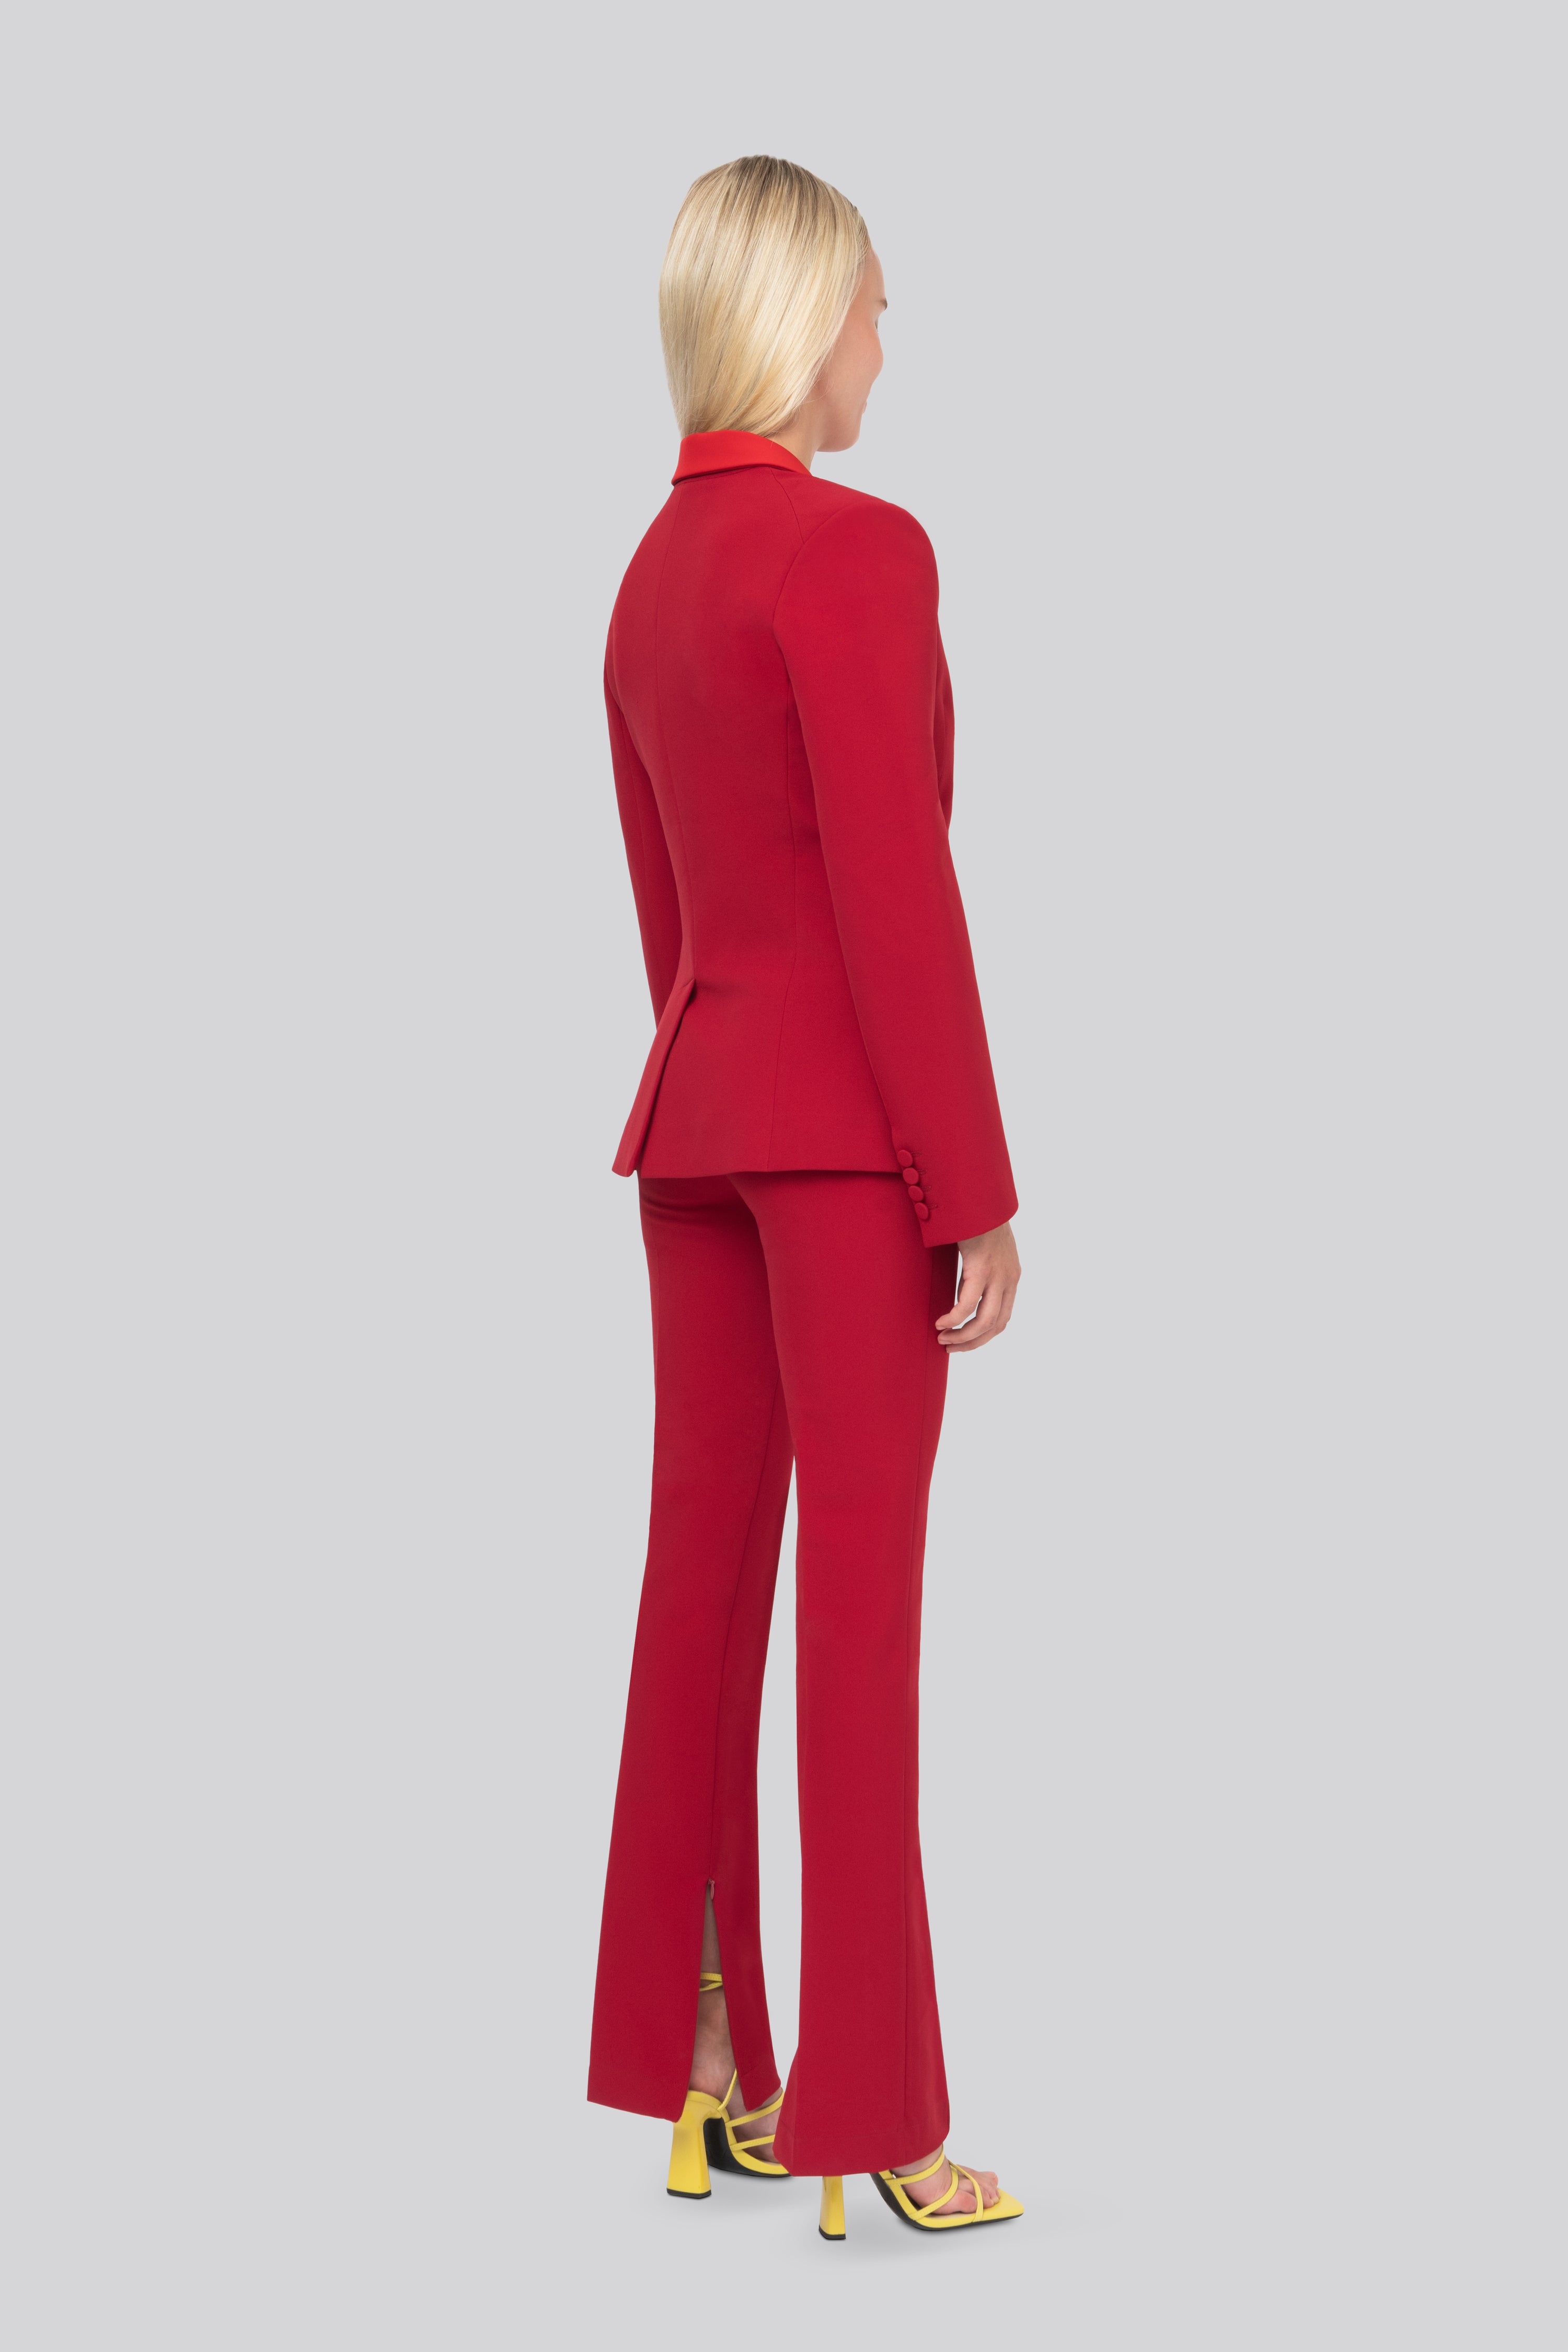 The Red Neo-Crepe Goldie Blazer